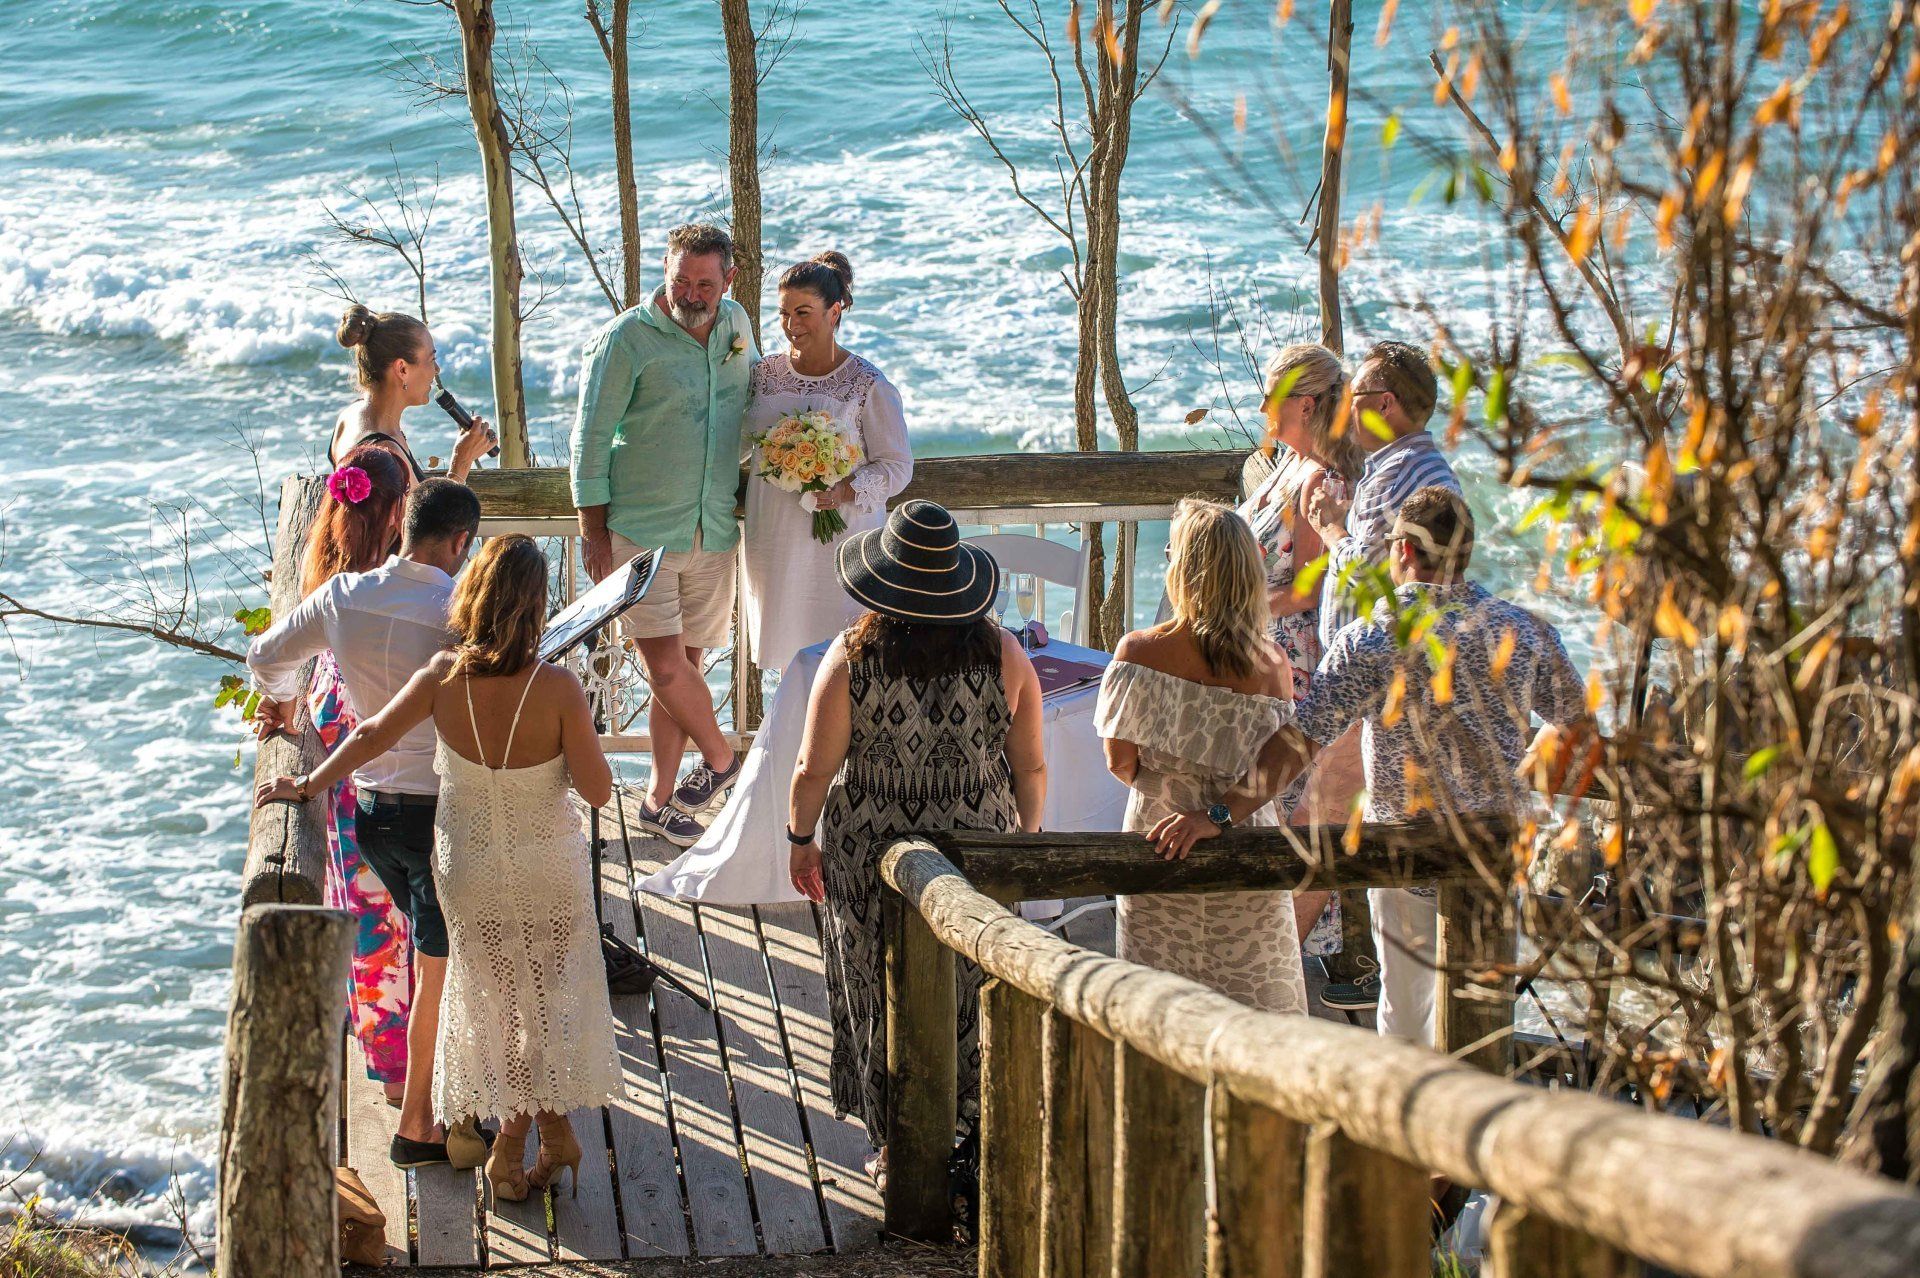 Noosa Little Cove platform Wedding bride holding yellow flowers in white dress, groom in green shirt, guests all happy